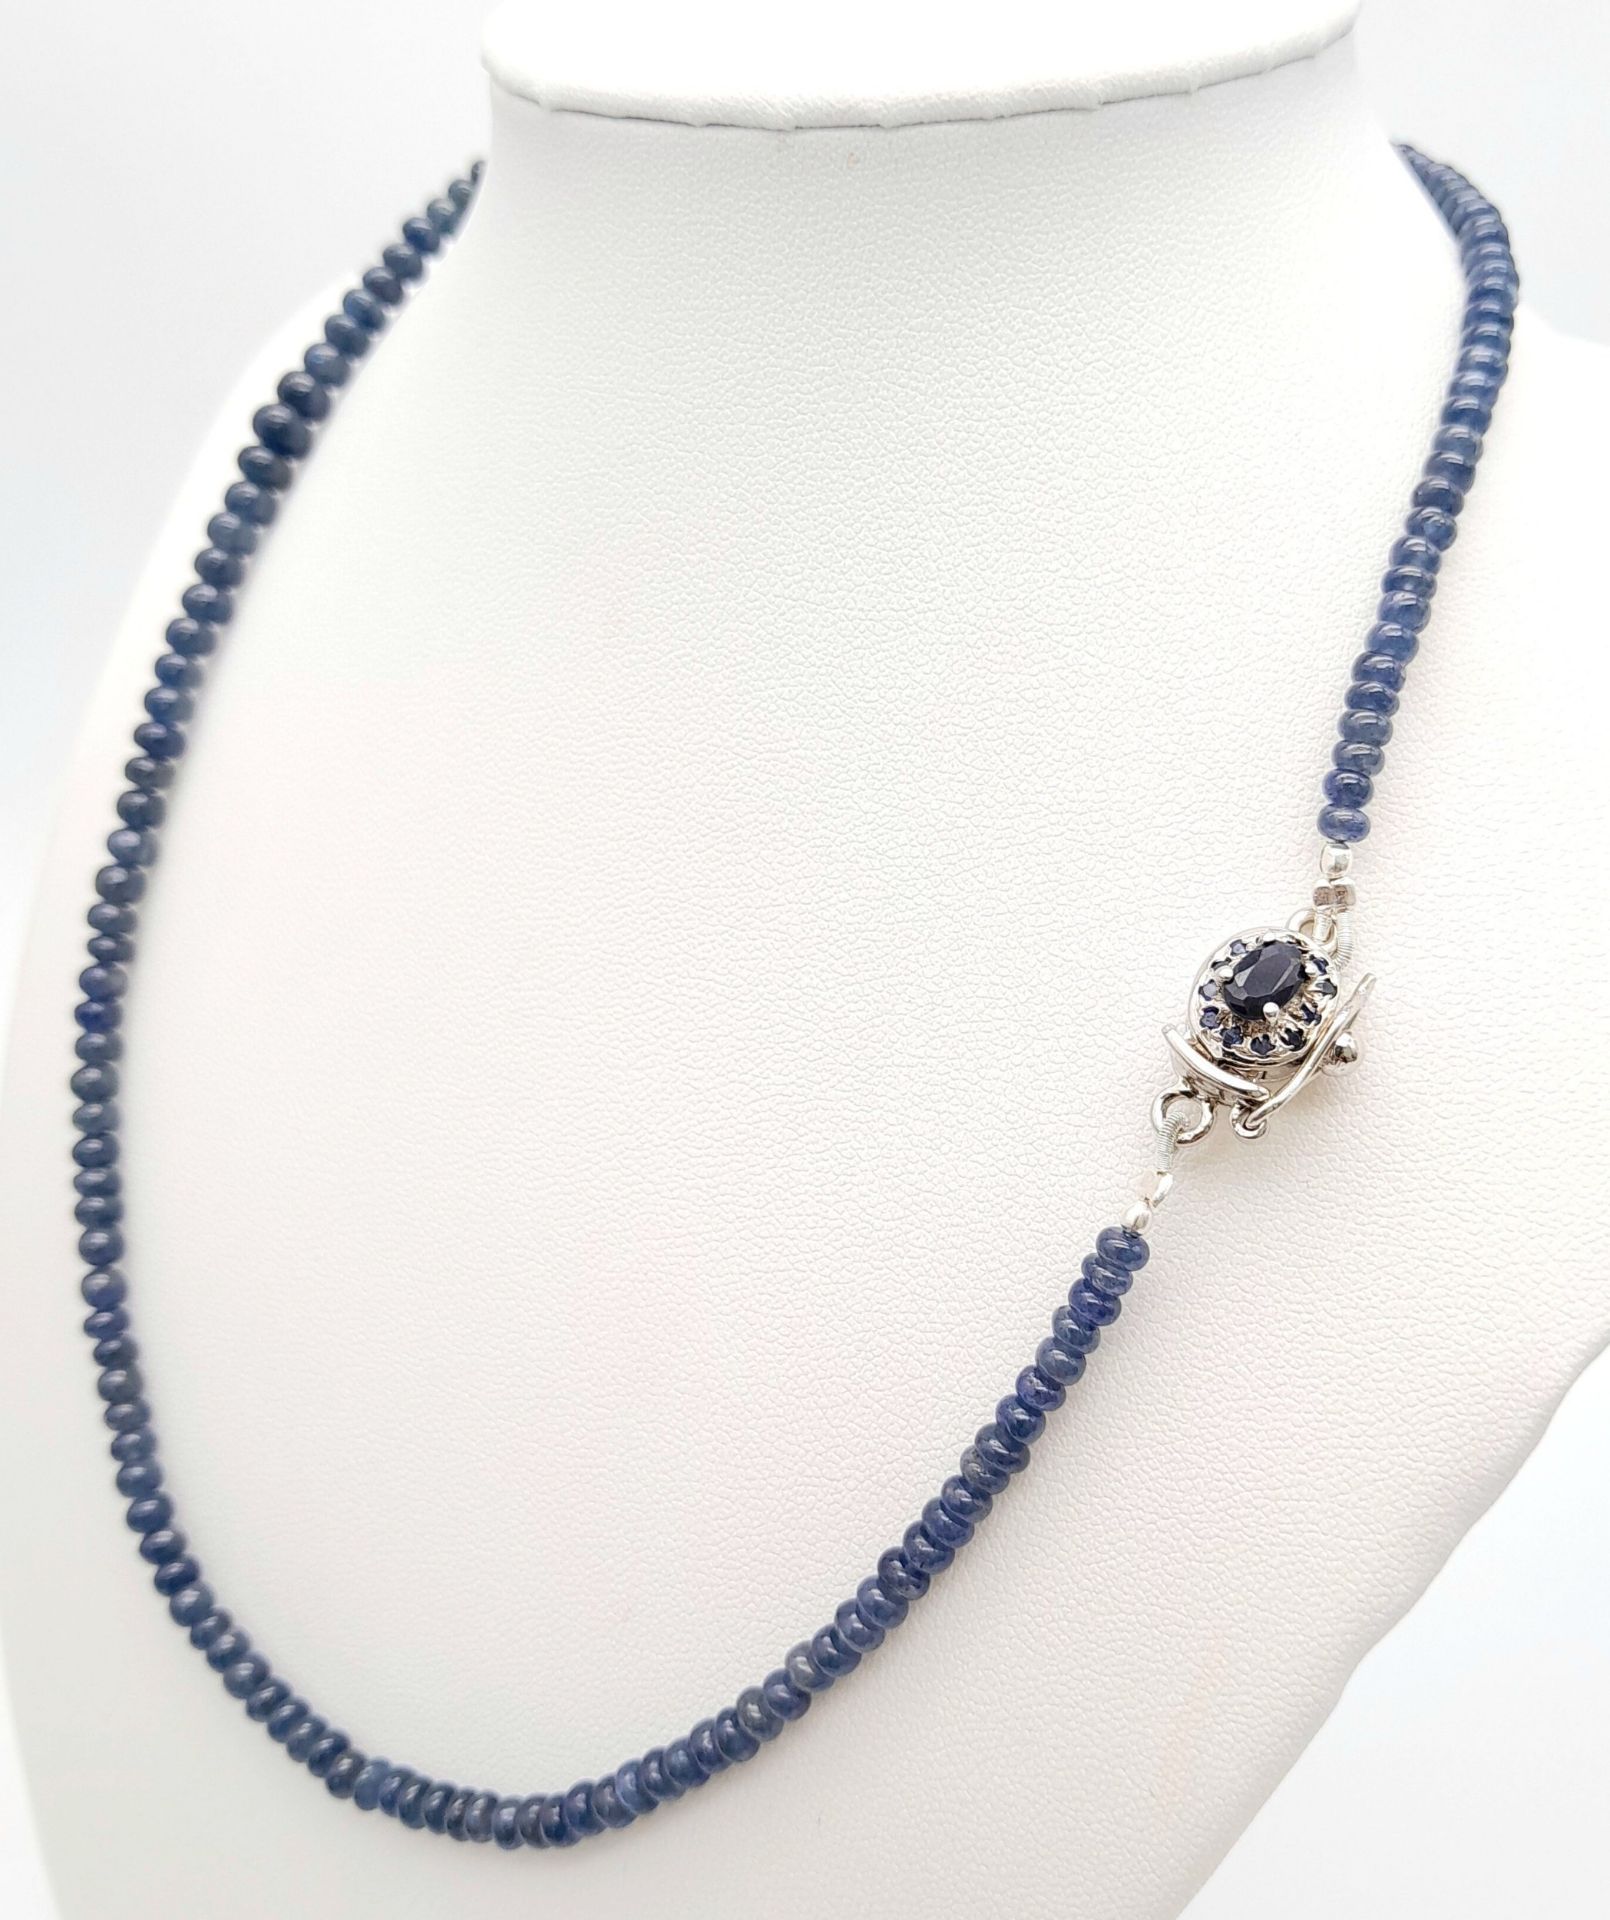 A 115ctw Blue Sapphire Small Rondelle Single Strand Necklace - with Sapphire and 925 Silver clasp. - Image 3 of 5